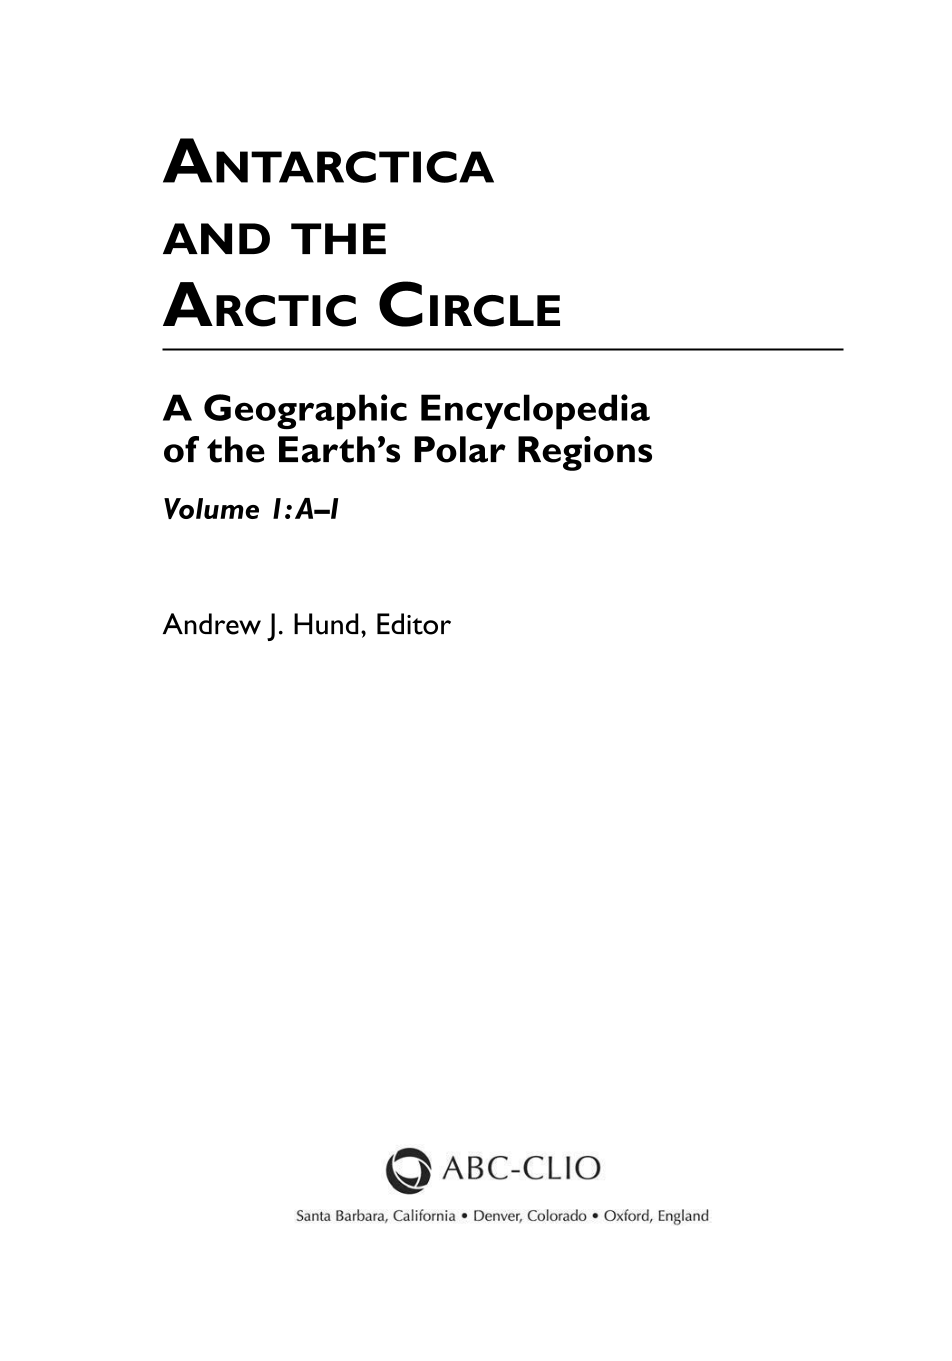 Antarctica and the Arctic Circle: A Geographic Encyclopedia of the Earth's Polar Regions [2 volumes] page iii1